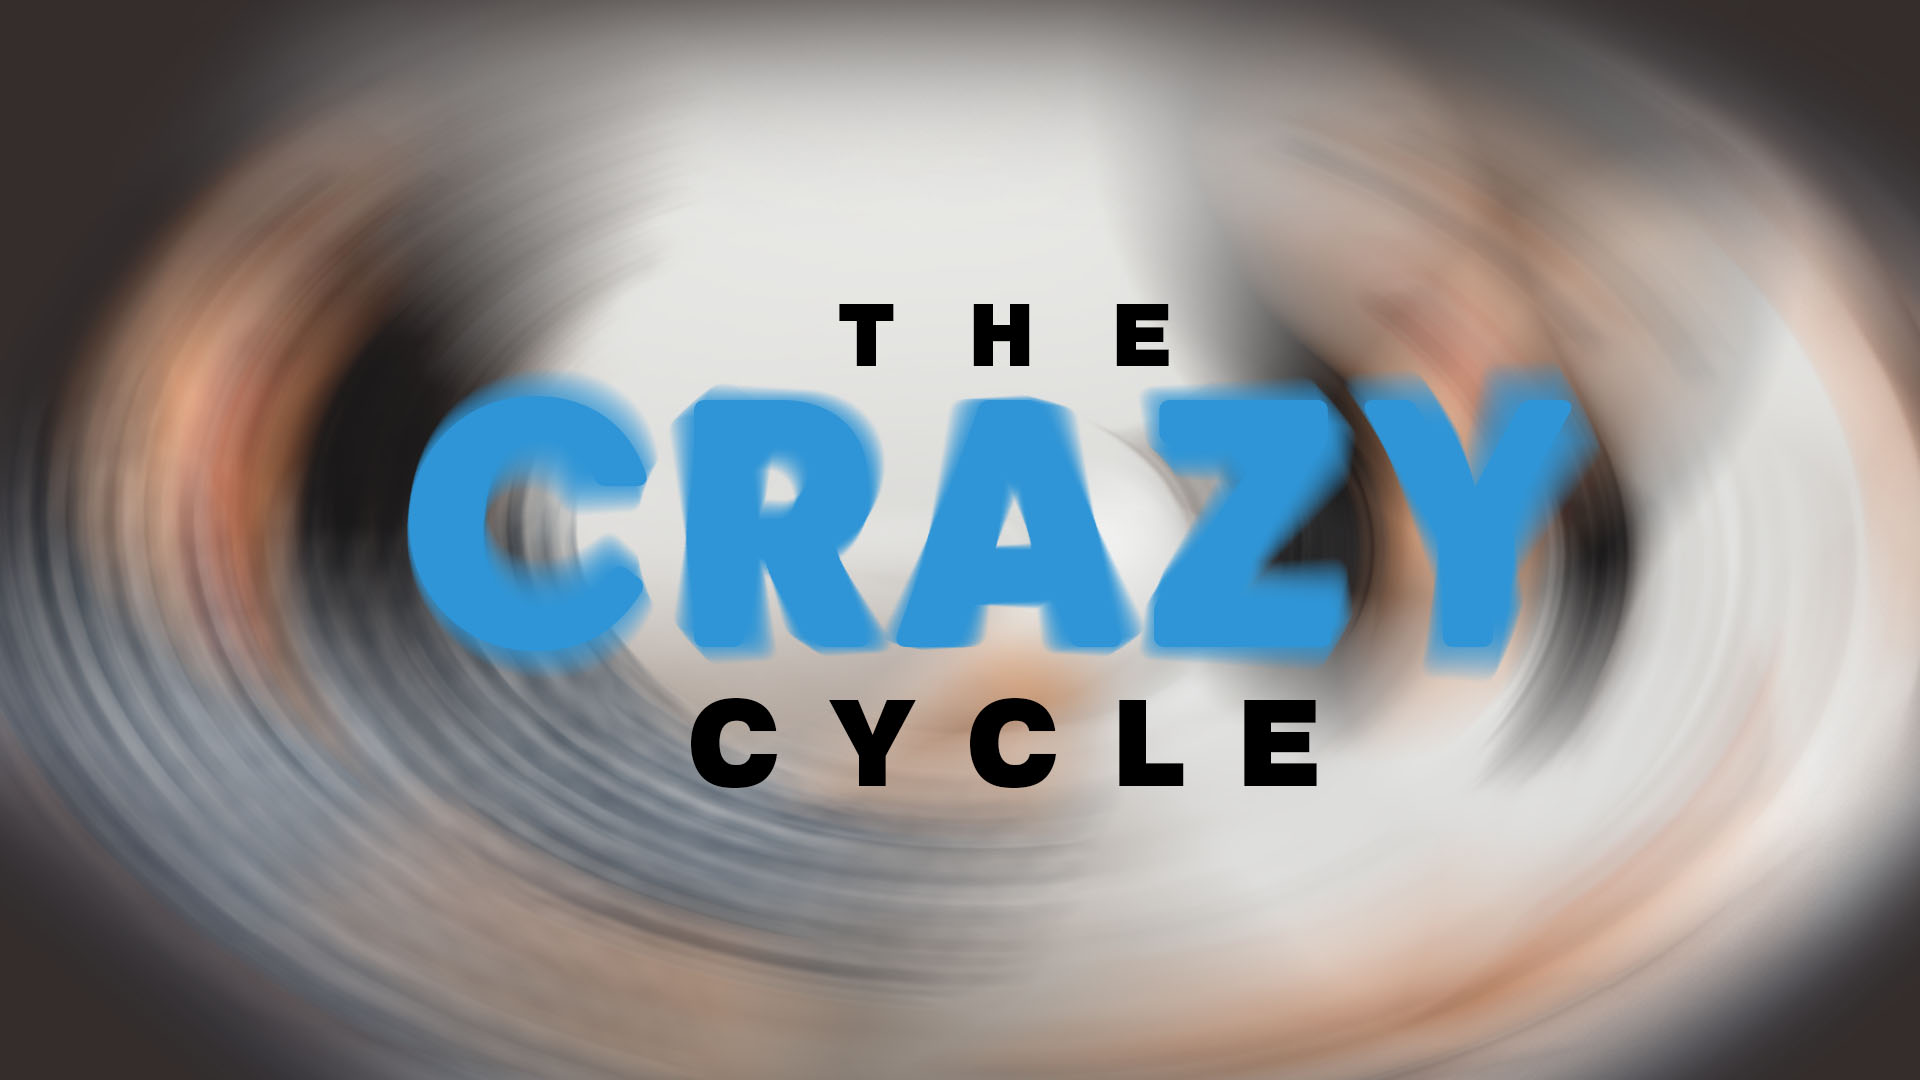 THE CRAZY CYCLE